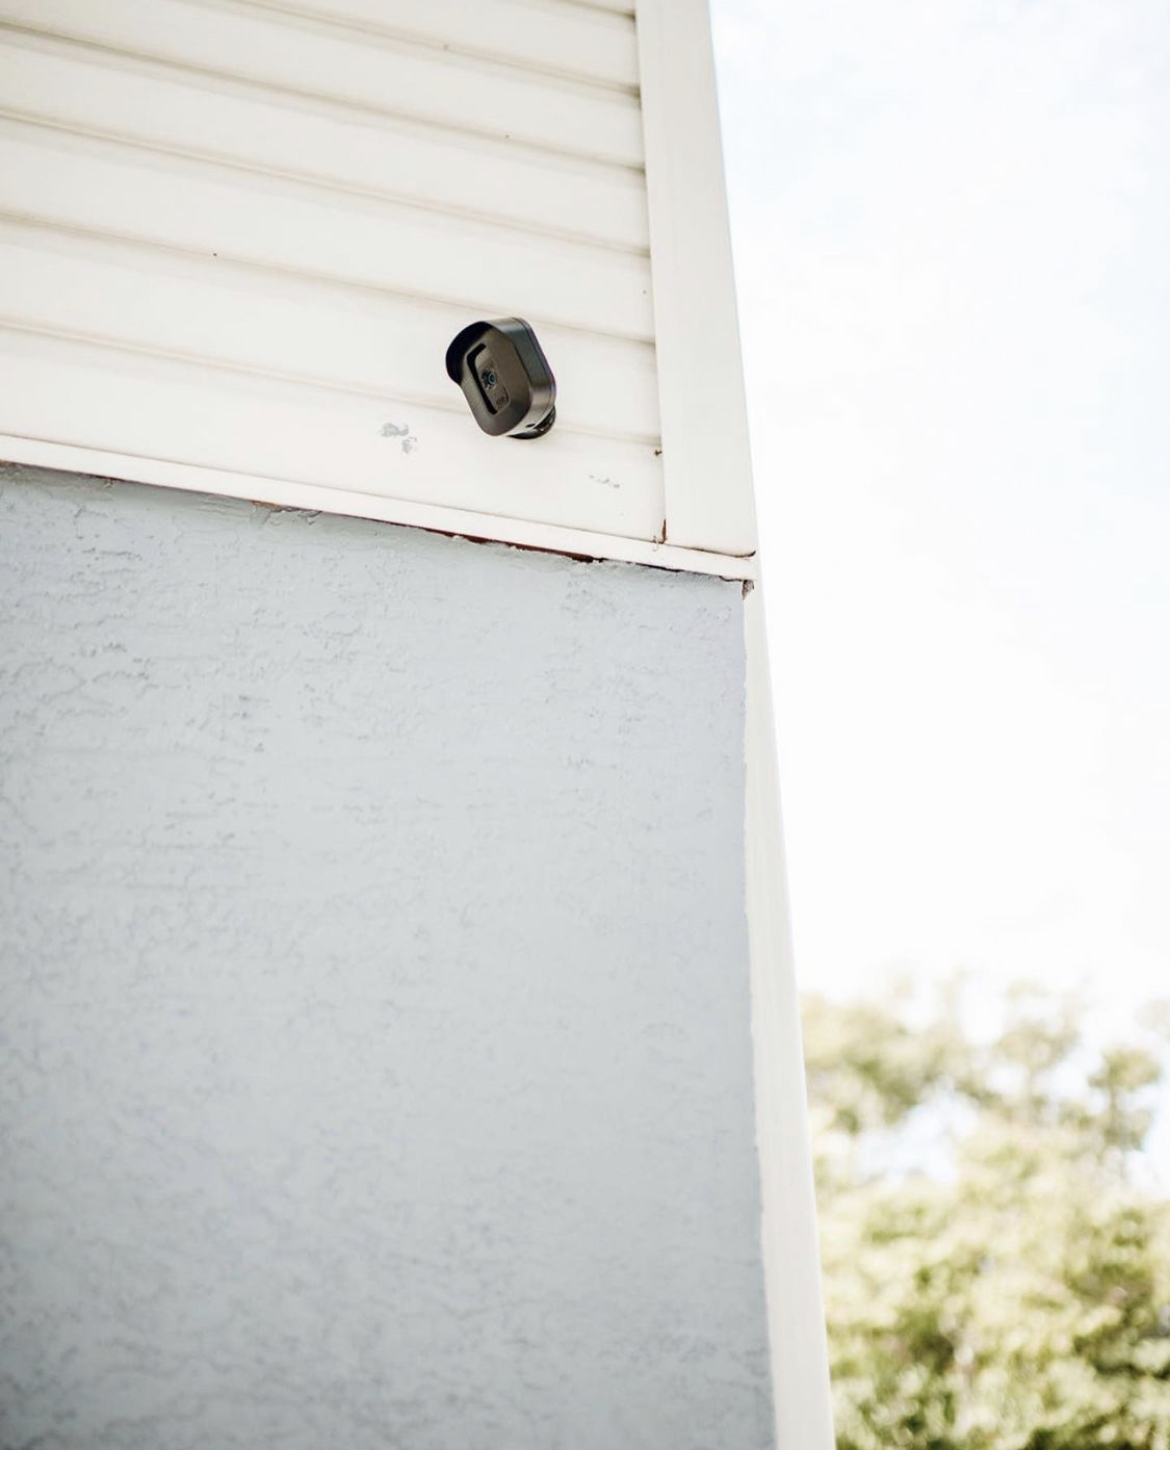 CCTV protects the female guests of the Fresh Life Recovery Homes to keep them safe and sound while recovering from drug and alcohol addiction.